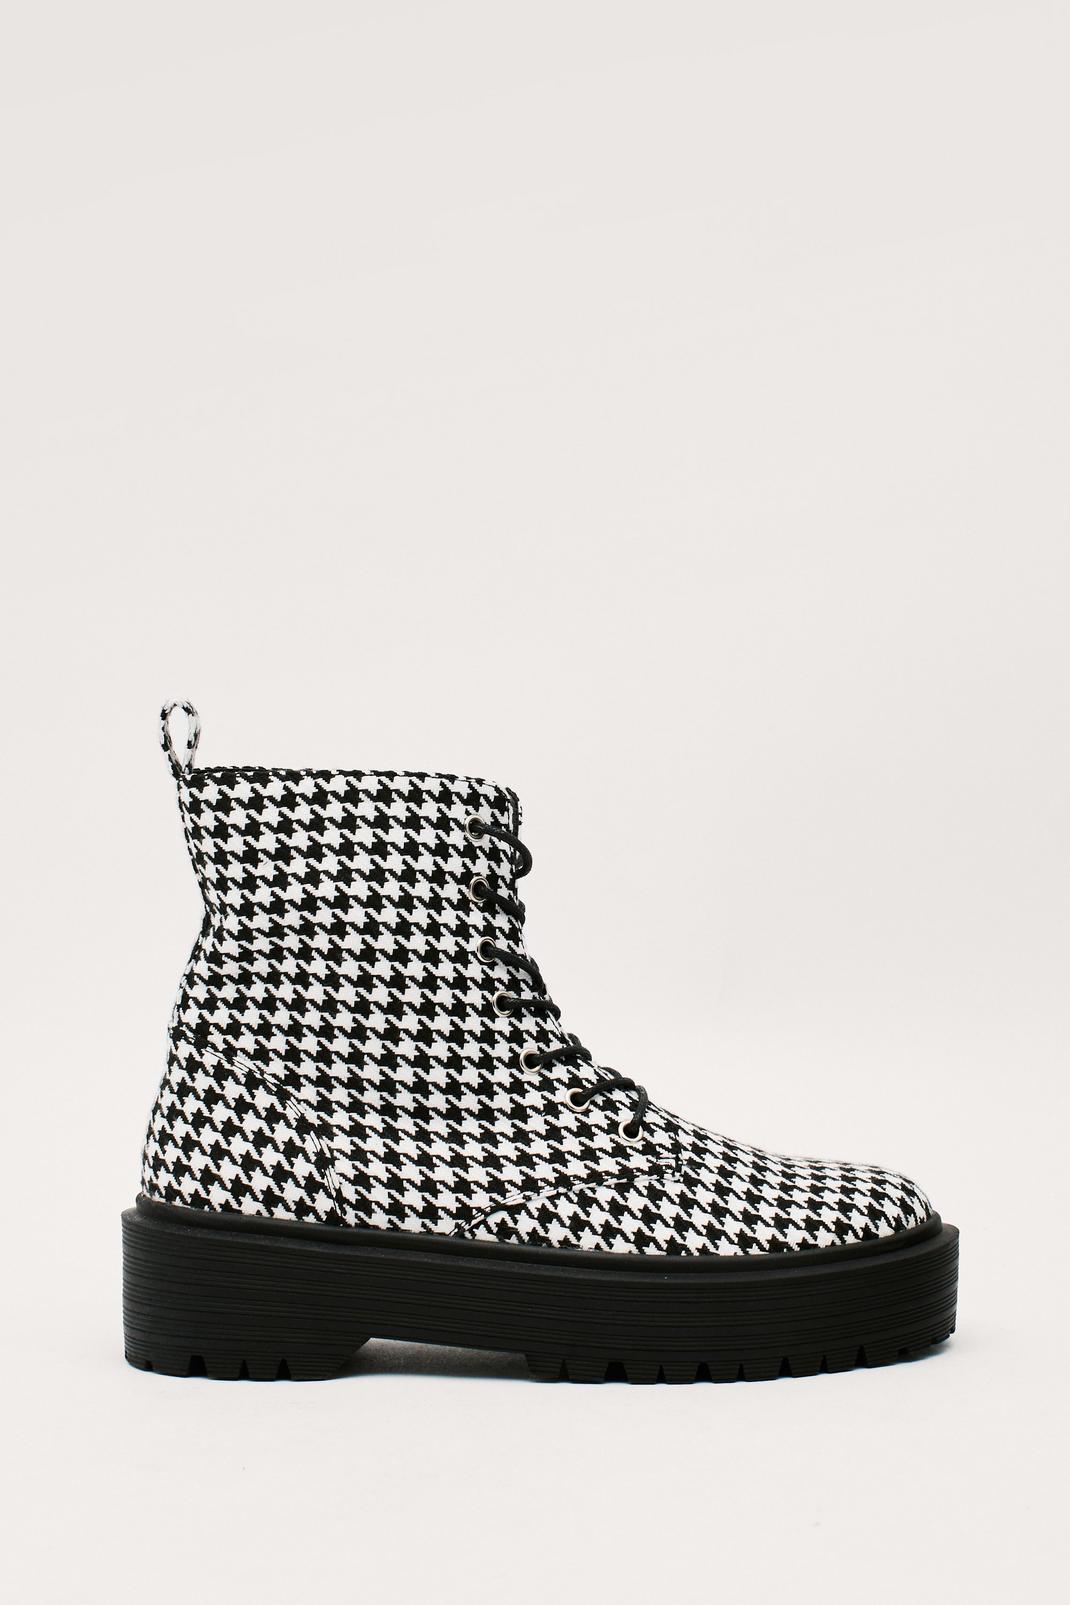 Black_white Houndstooth Chunky Hiker Boots image number 1